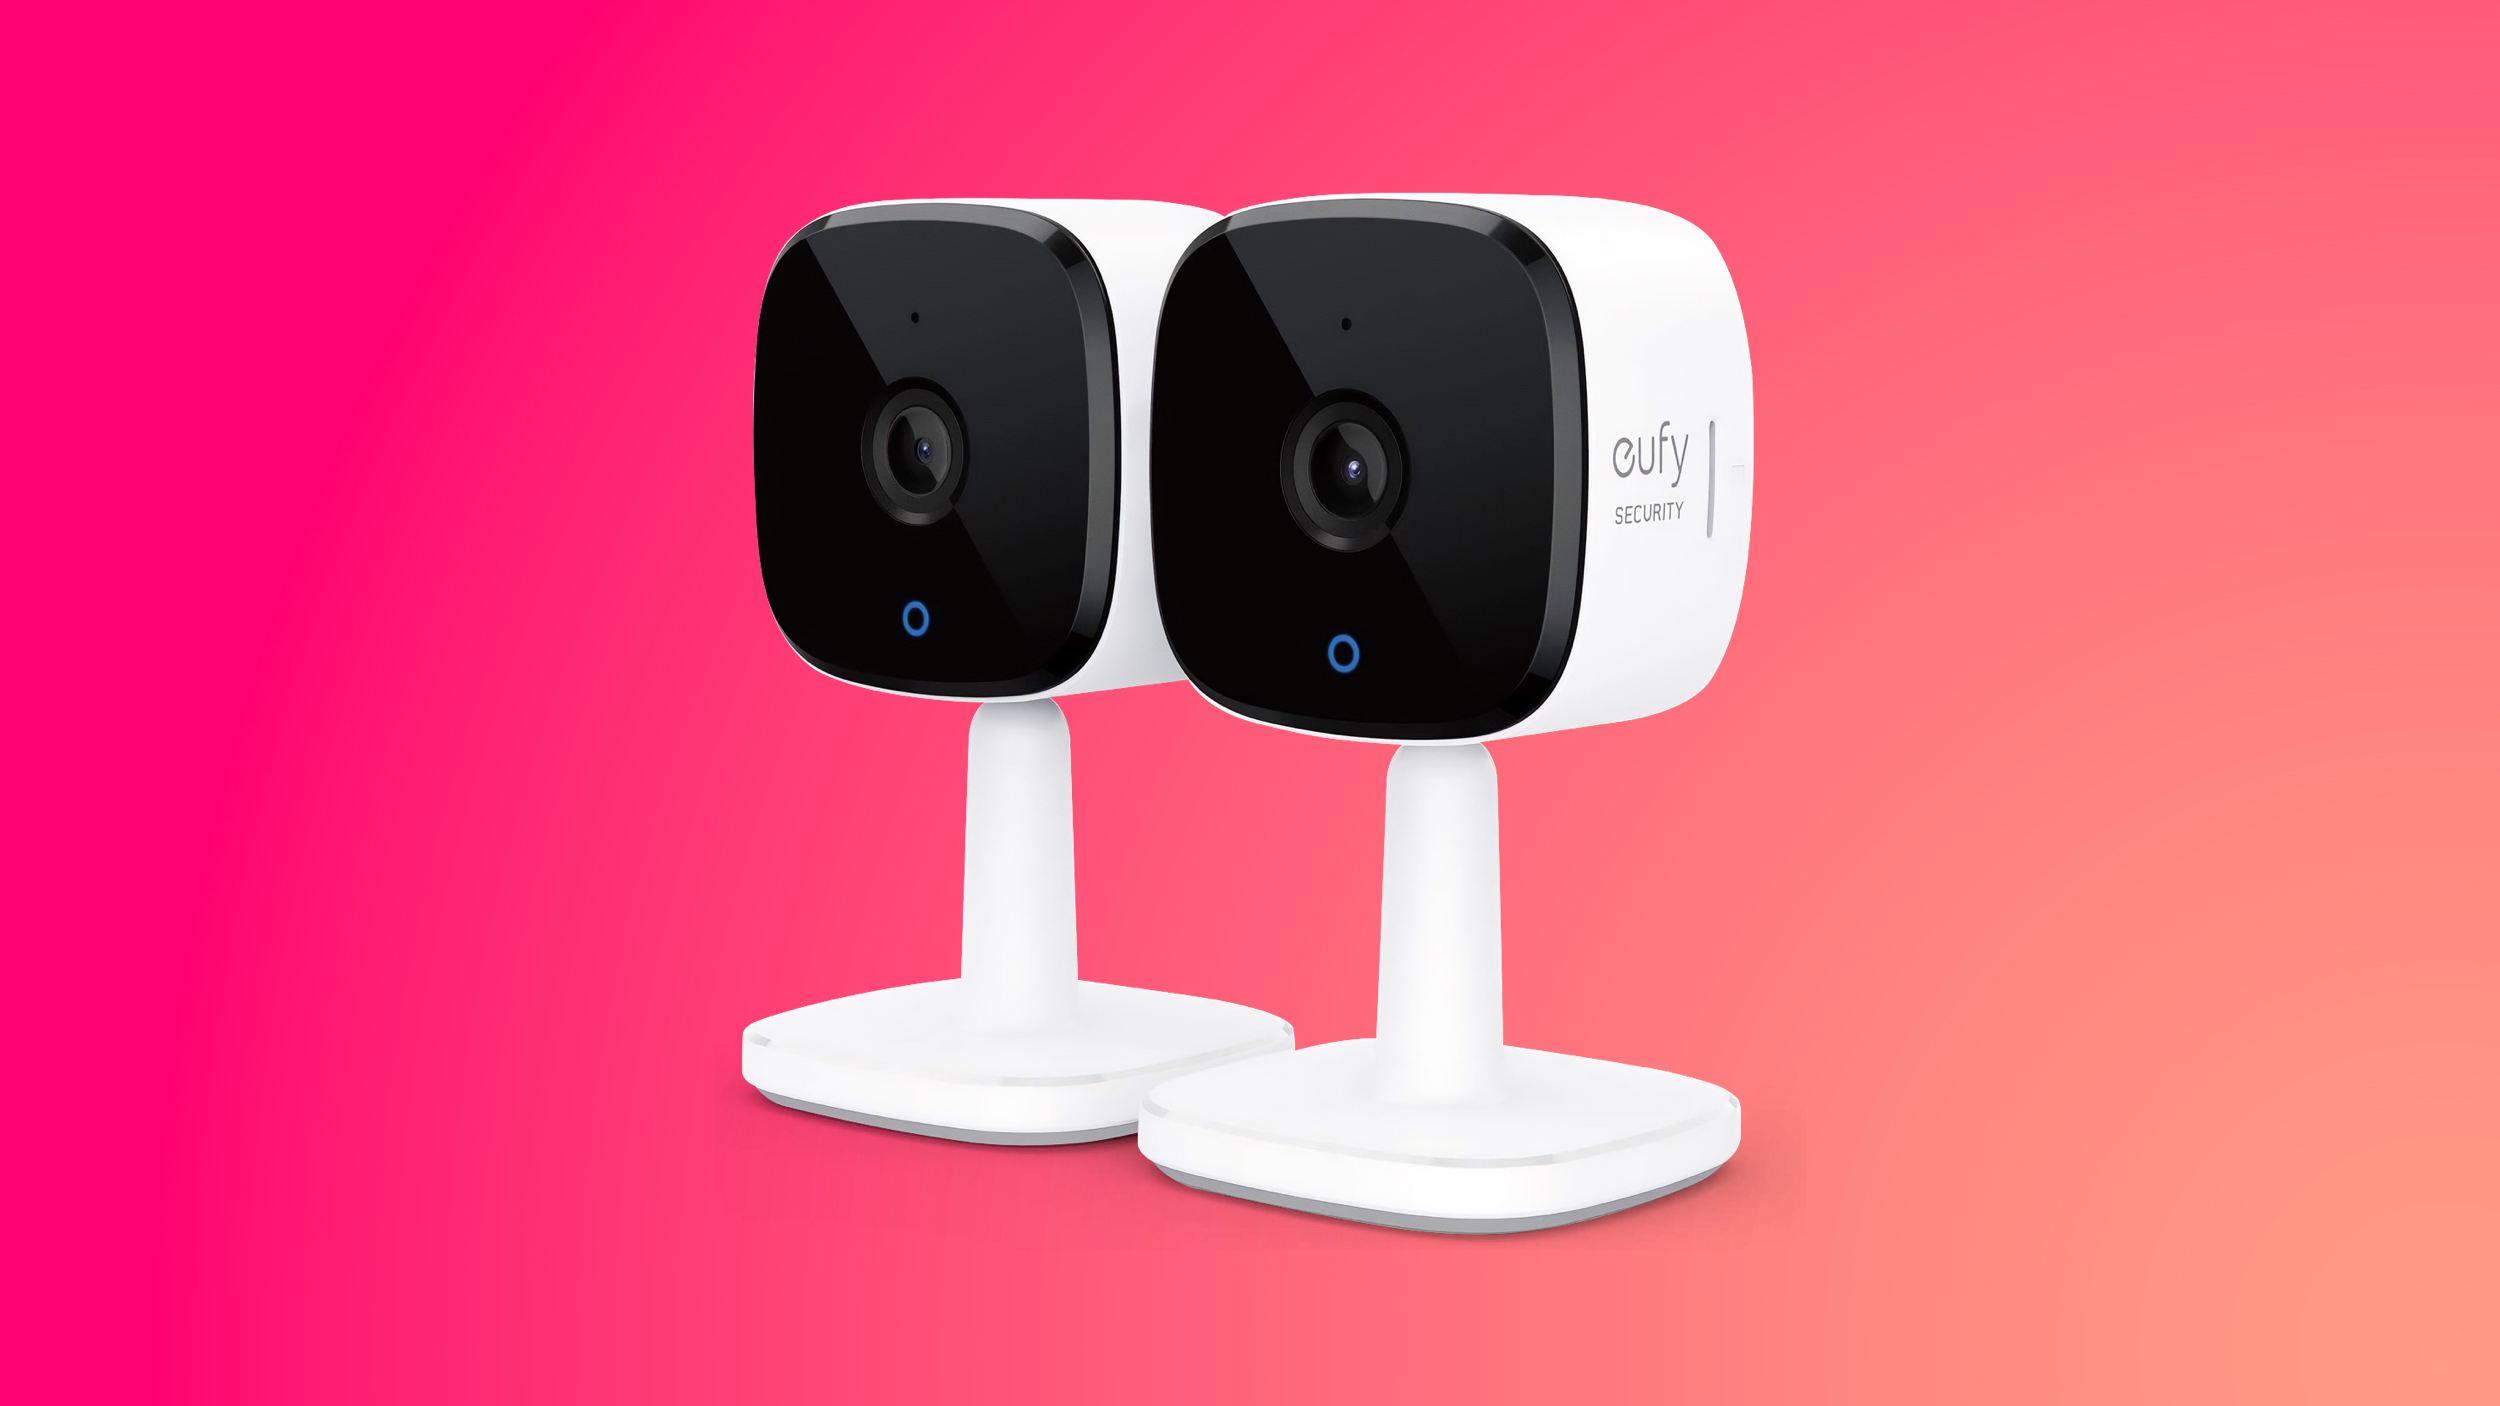 Anker Admits Eufy Cameras Did Not Offer End-to-End Encryption as Promised, Pledges to Do Better